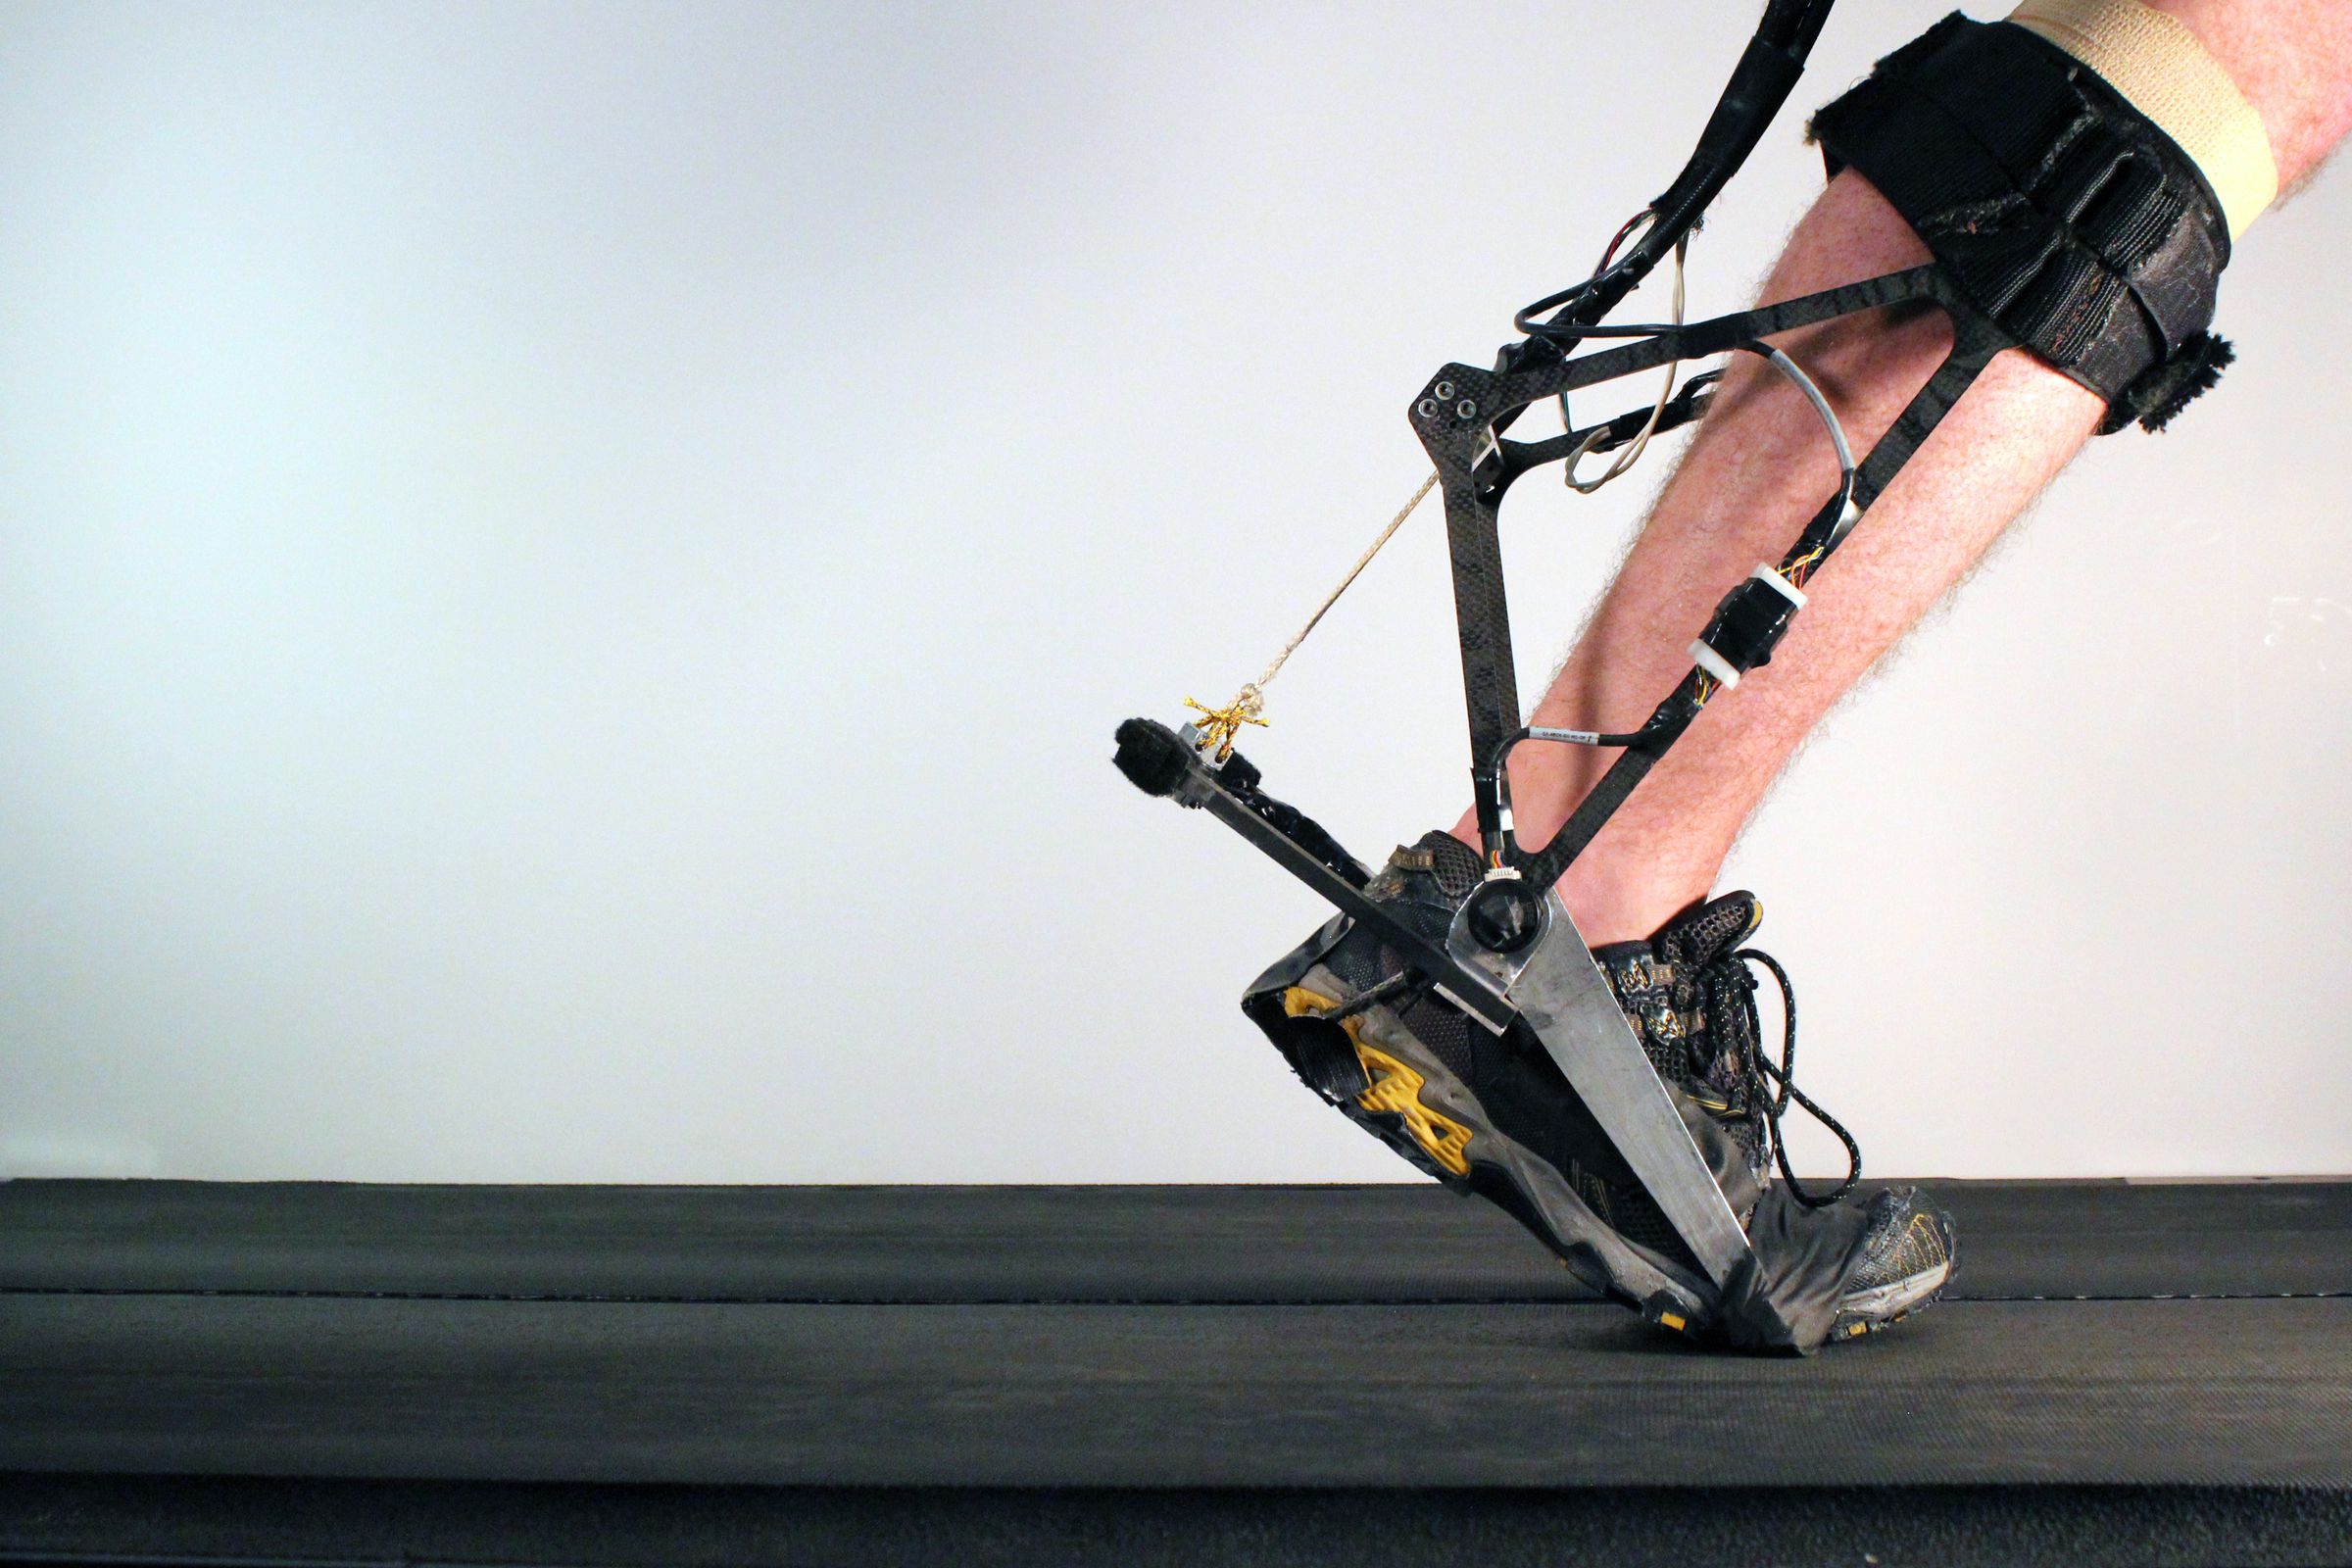 The ankle exoskeleton used in the new research reduced the energy expended by wearers by 24 percent.